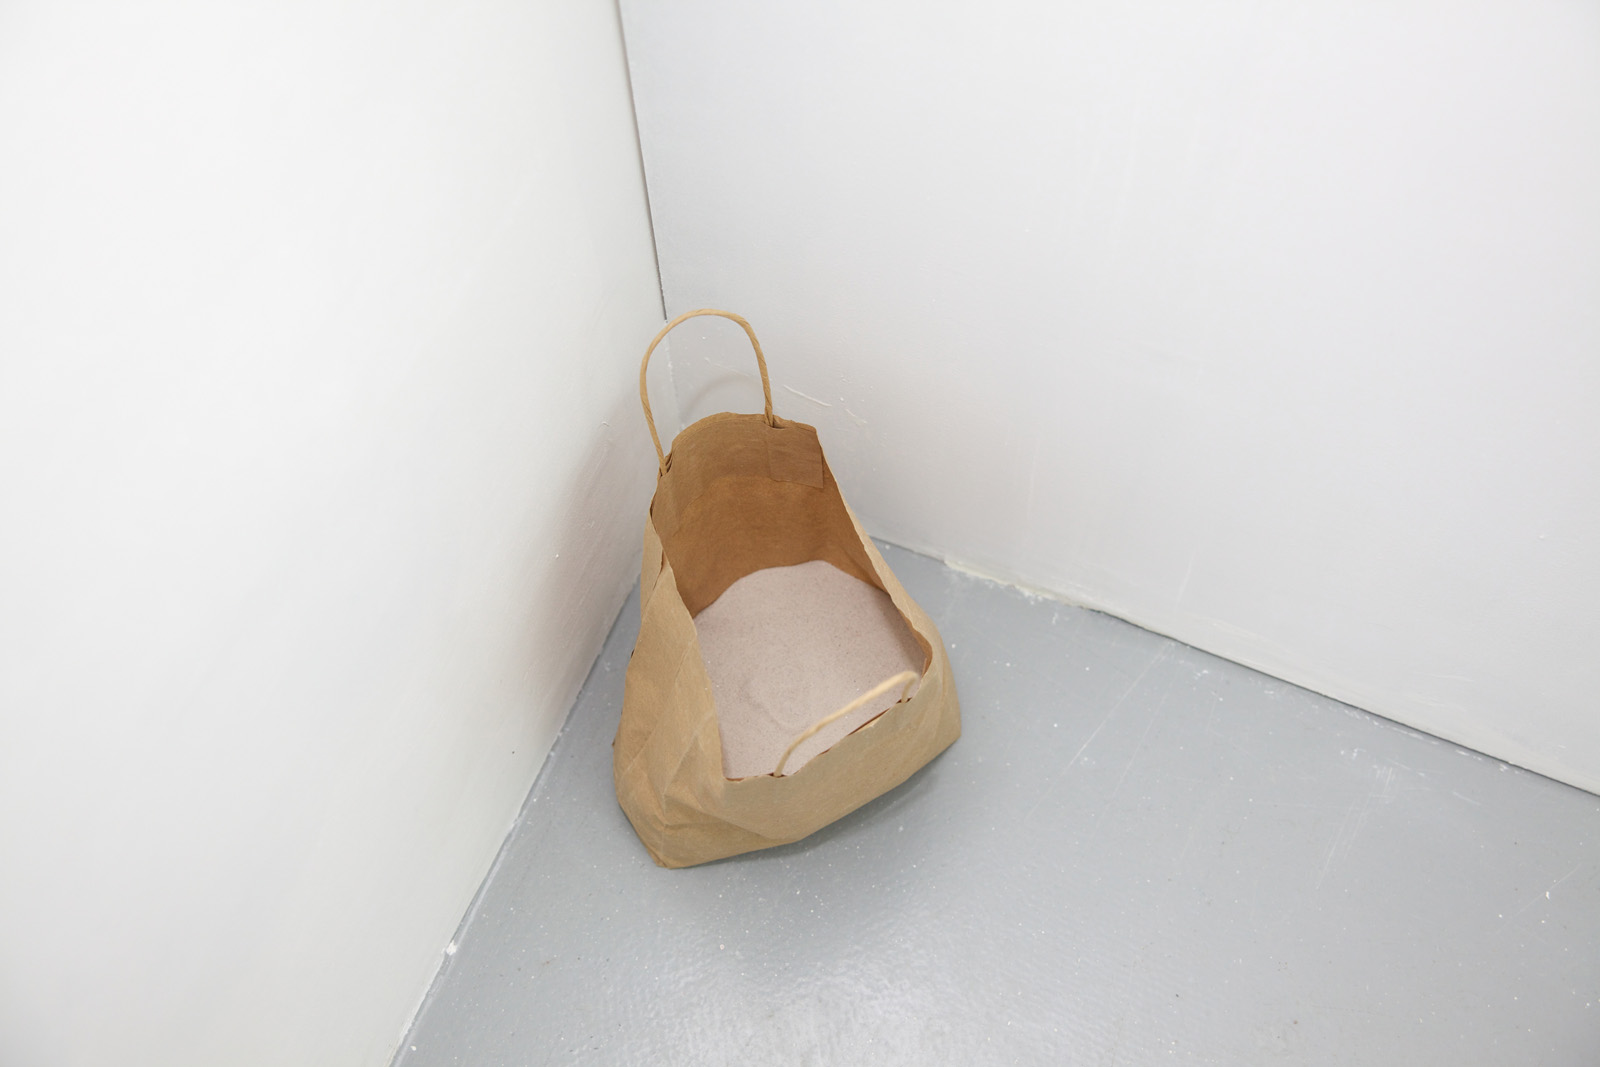 24 Hours, 2012. Paper bag, sand from 96 fifteen-minute hourglasses.